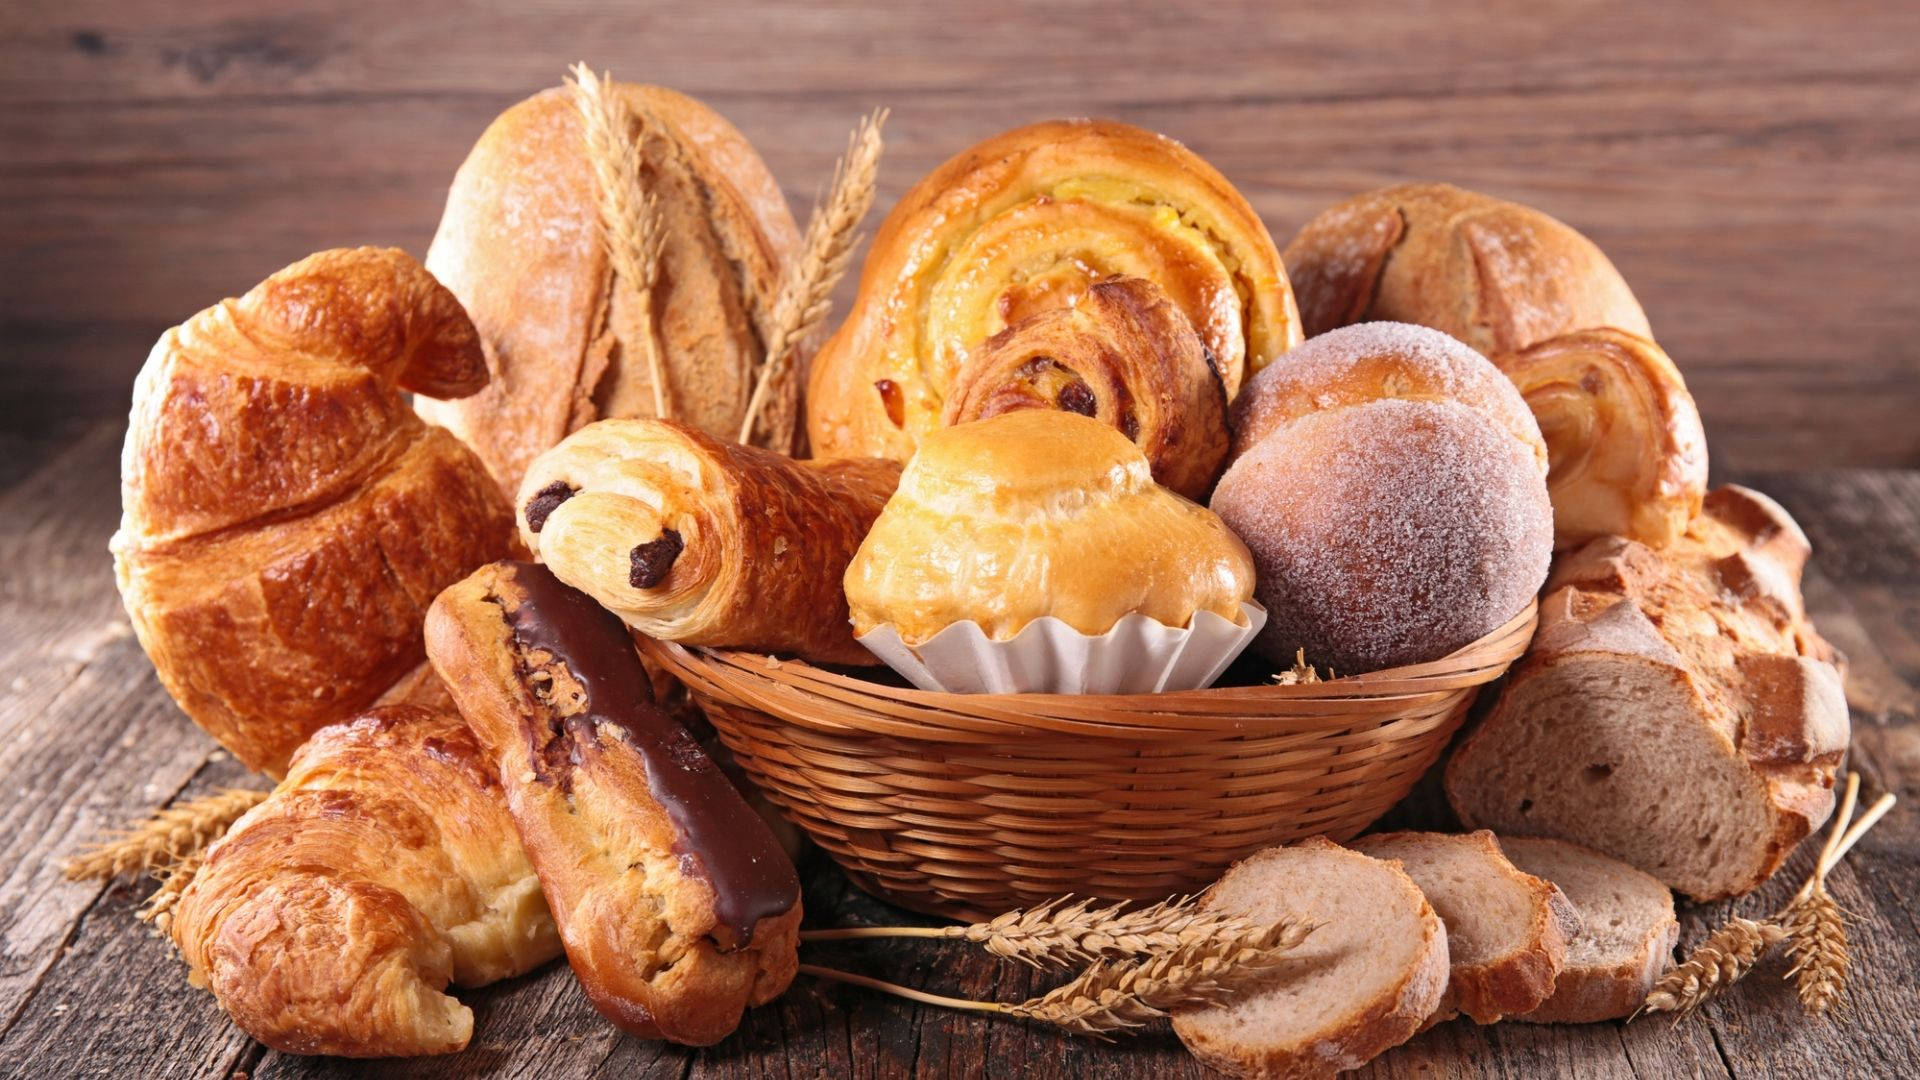 A Basket Overloaded With Artisan Breads Background